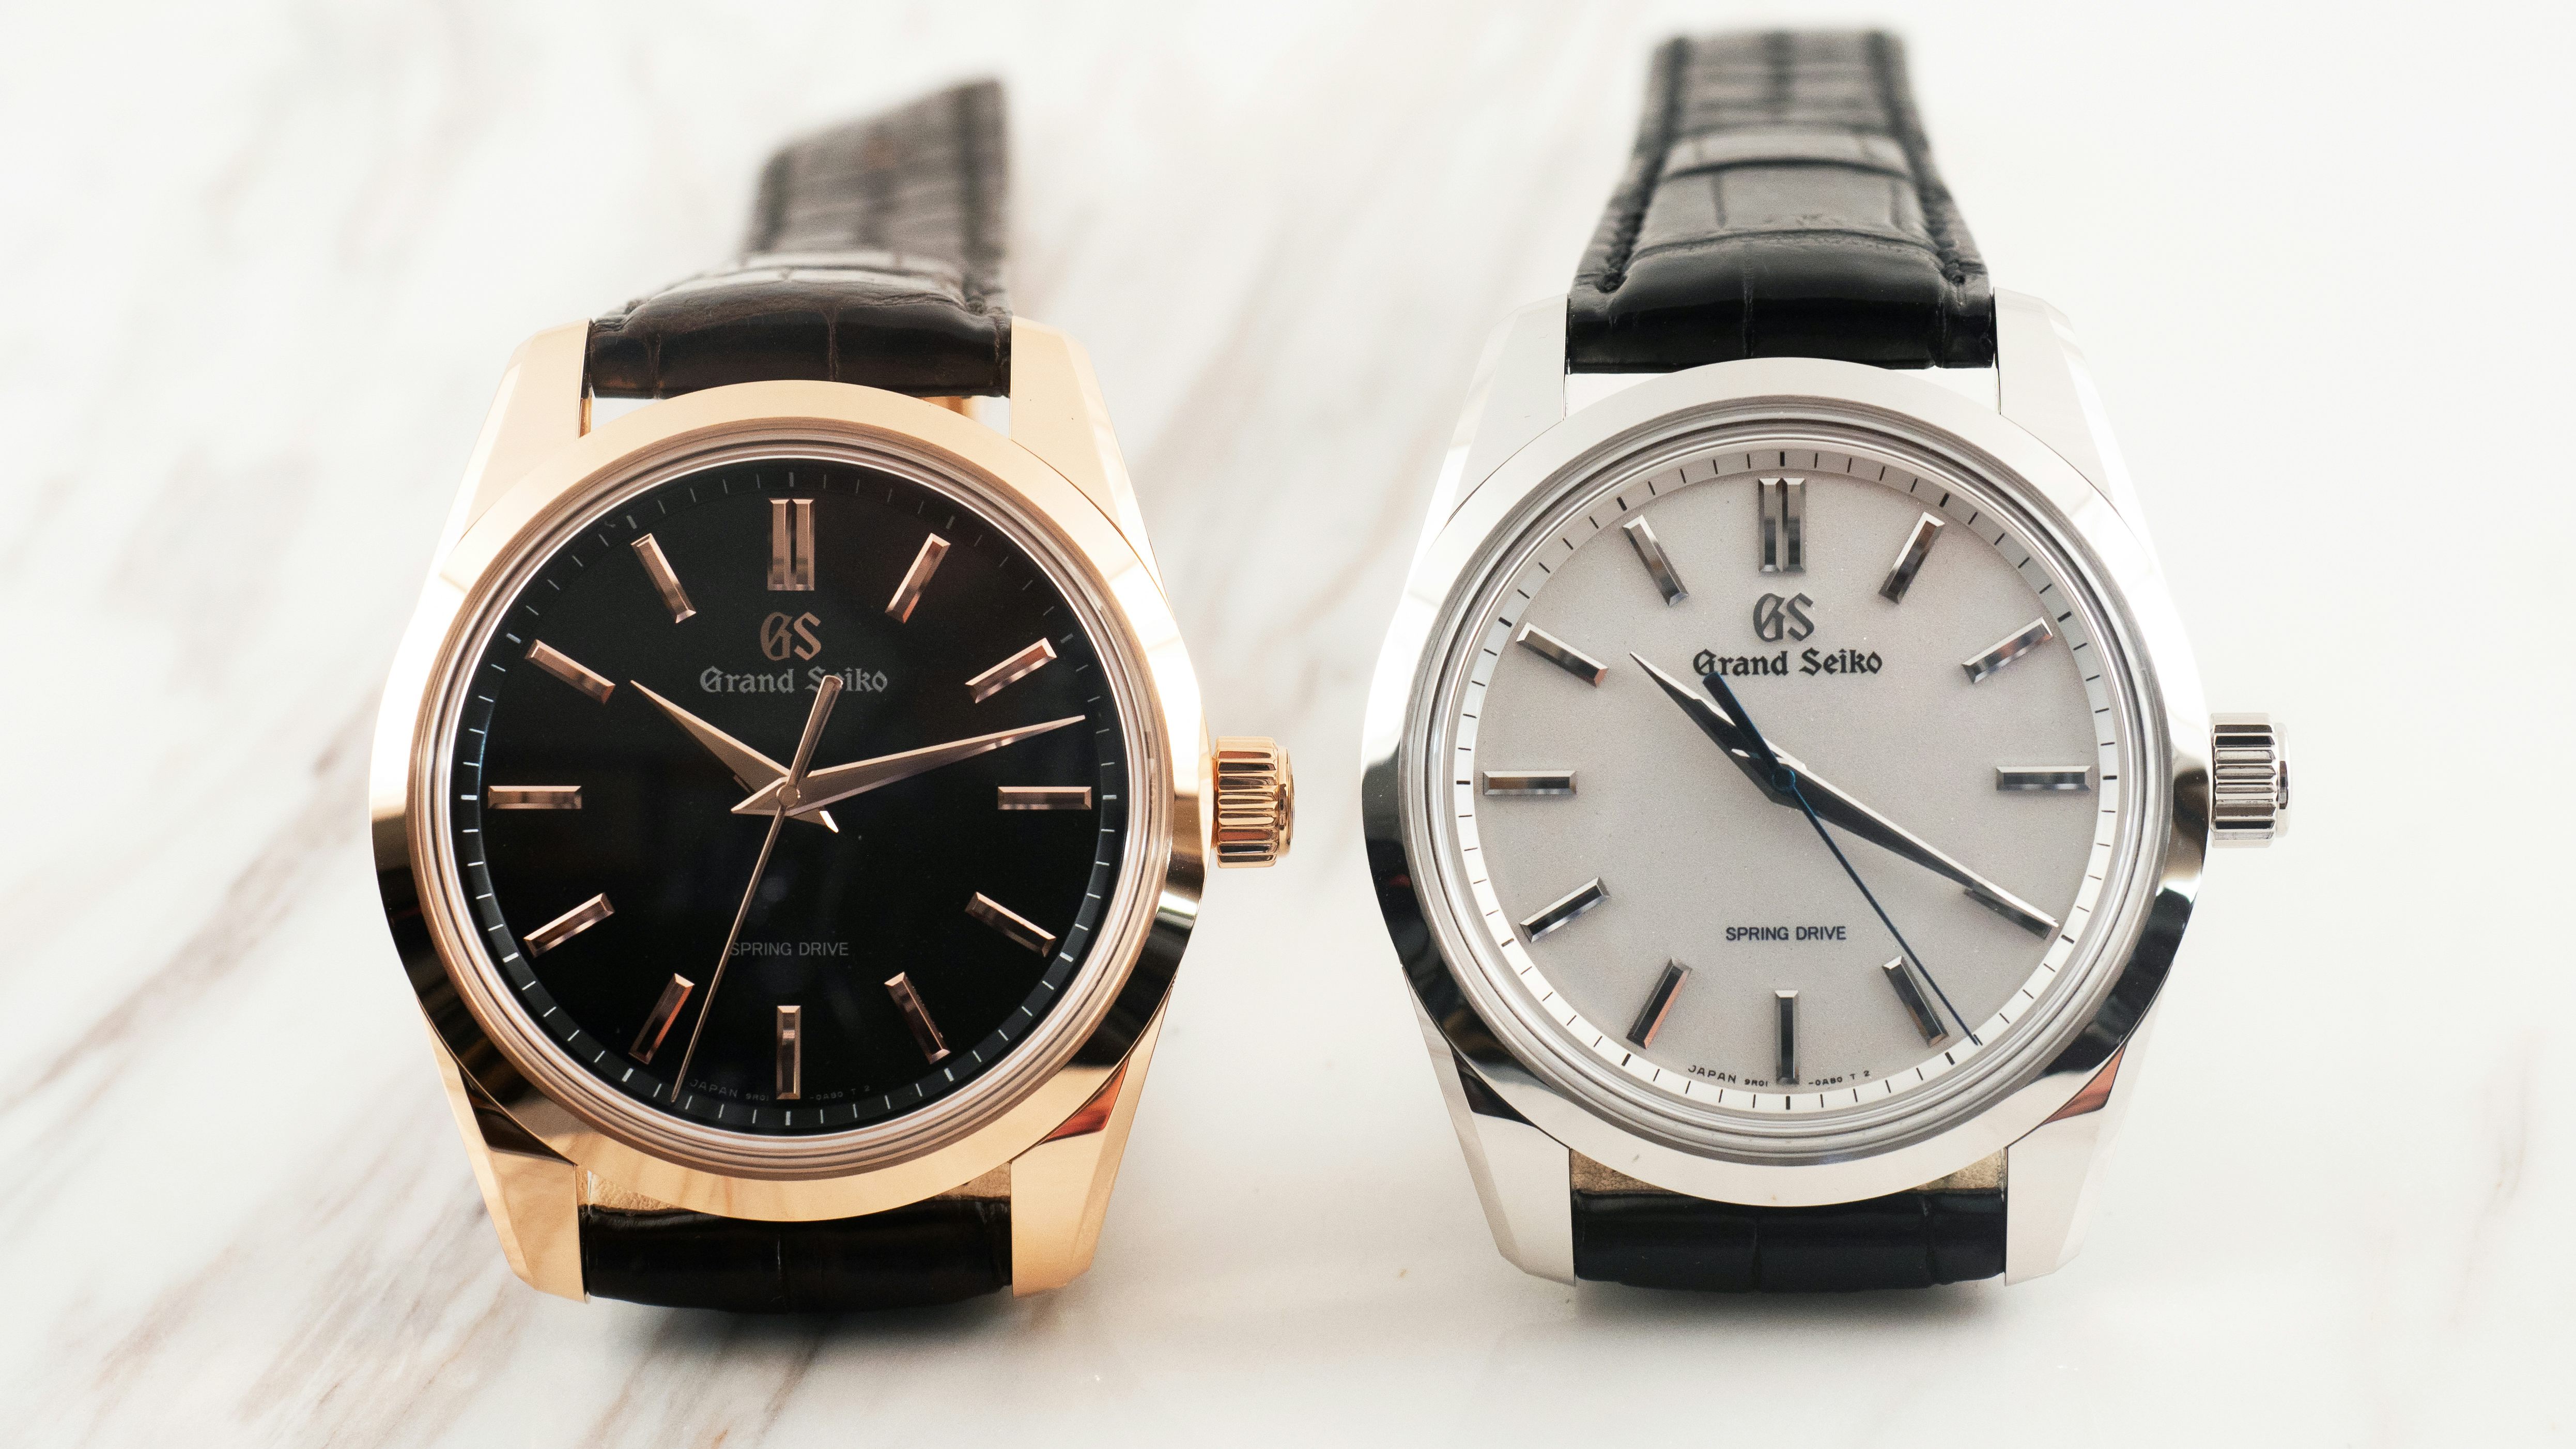 Hands-On: The Grand Seiko Spring Drive 8 Day Power Reserve - Hodinkee